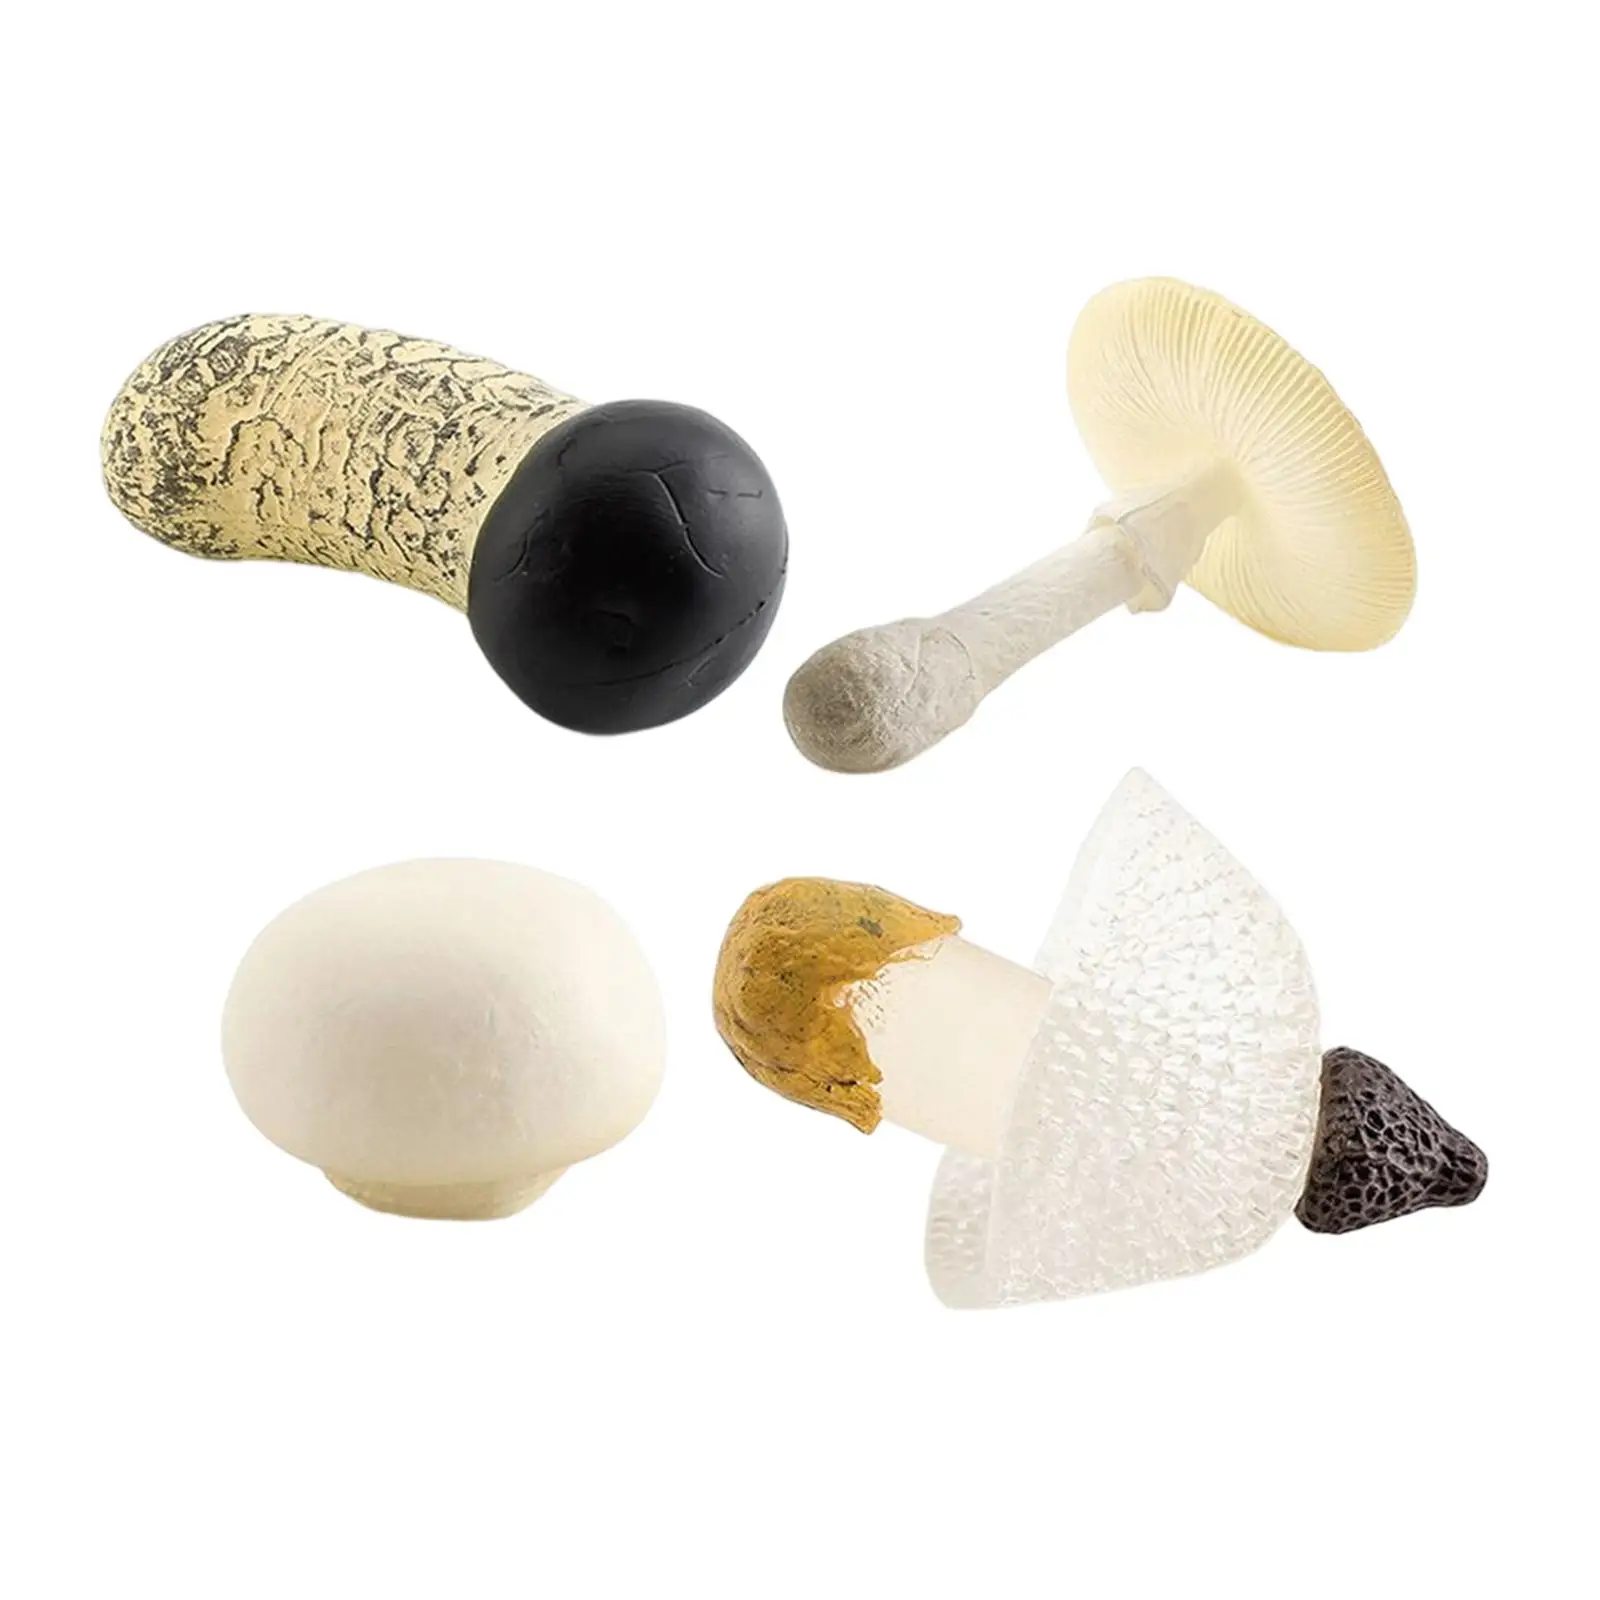 4Pcs Artificial Mushroom Model Props for Scene Layouts Toddlers Girls Boys